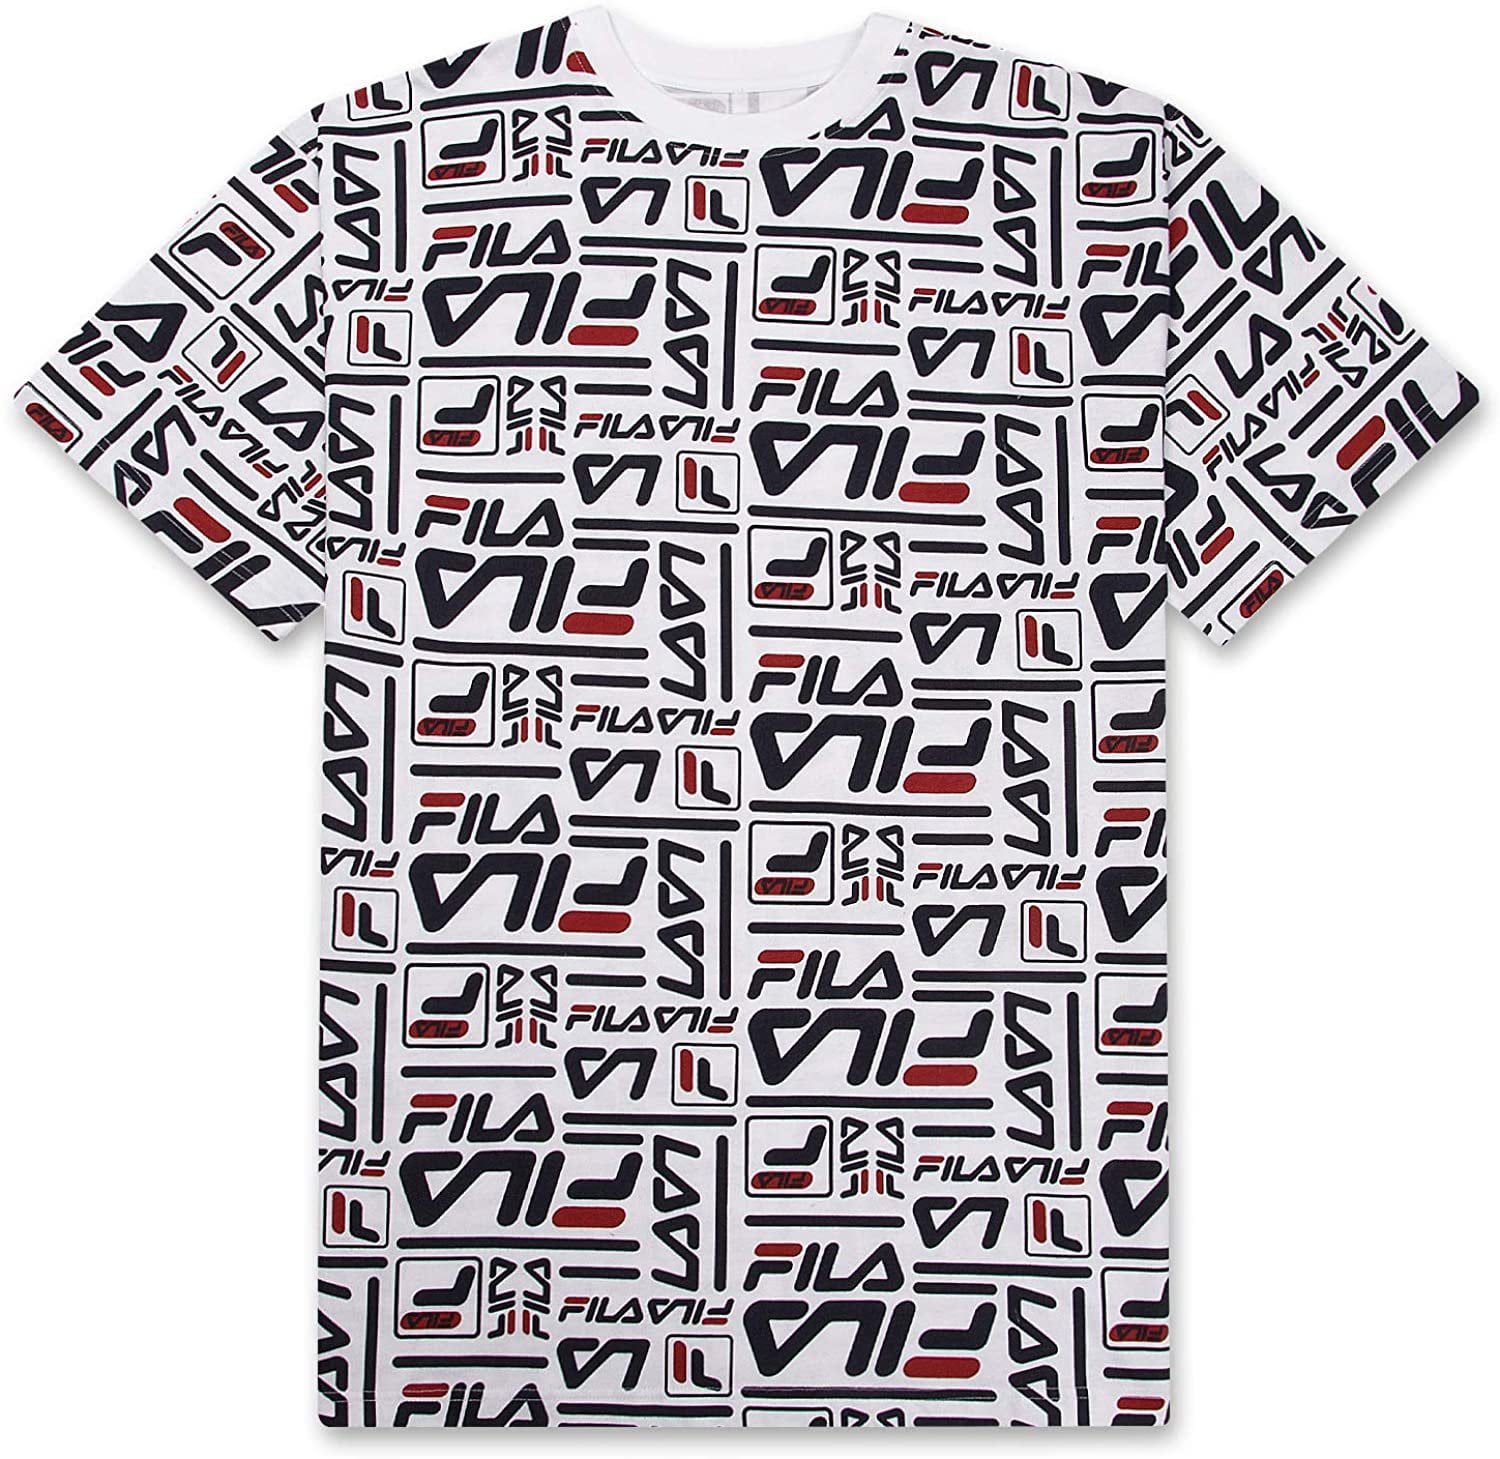 Champion Mens Big and Tall All Over Print Shirt for Men Big & Tall Graphic Tee 